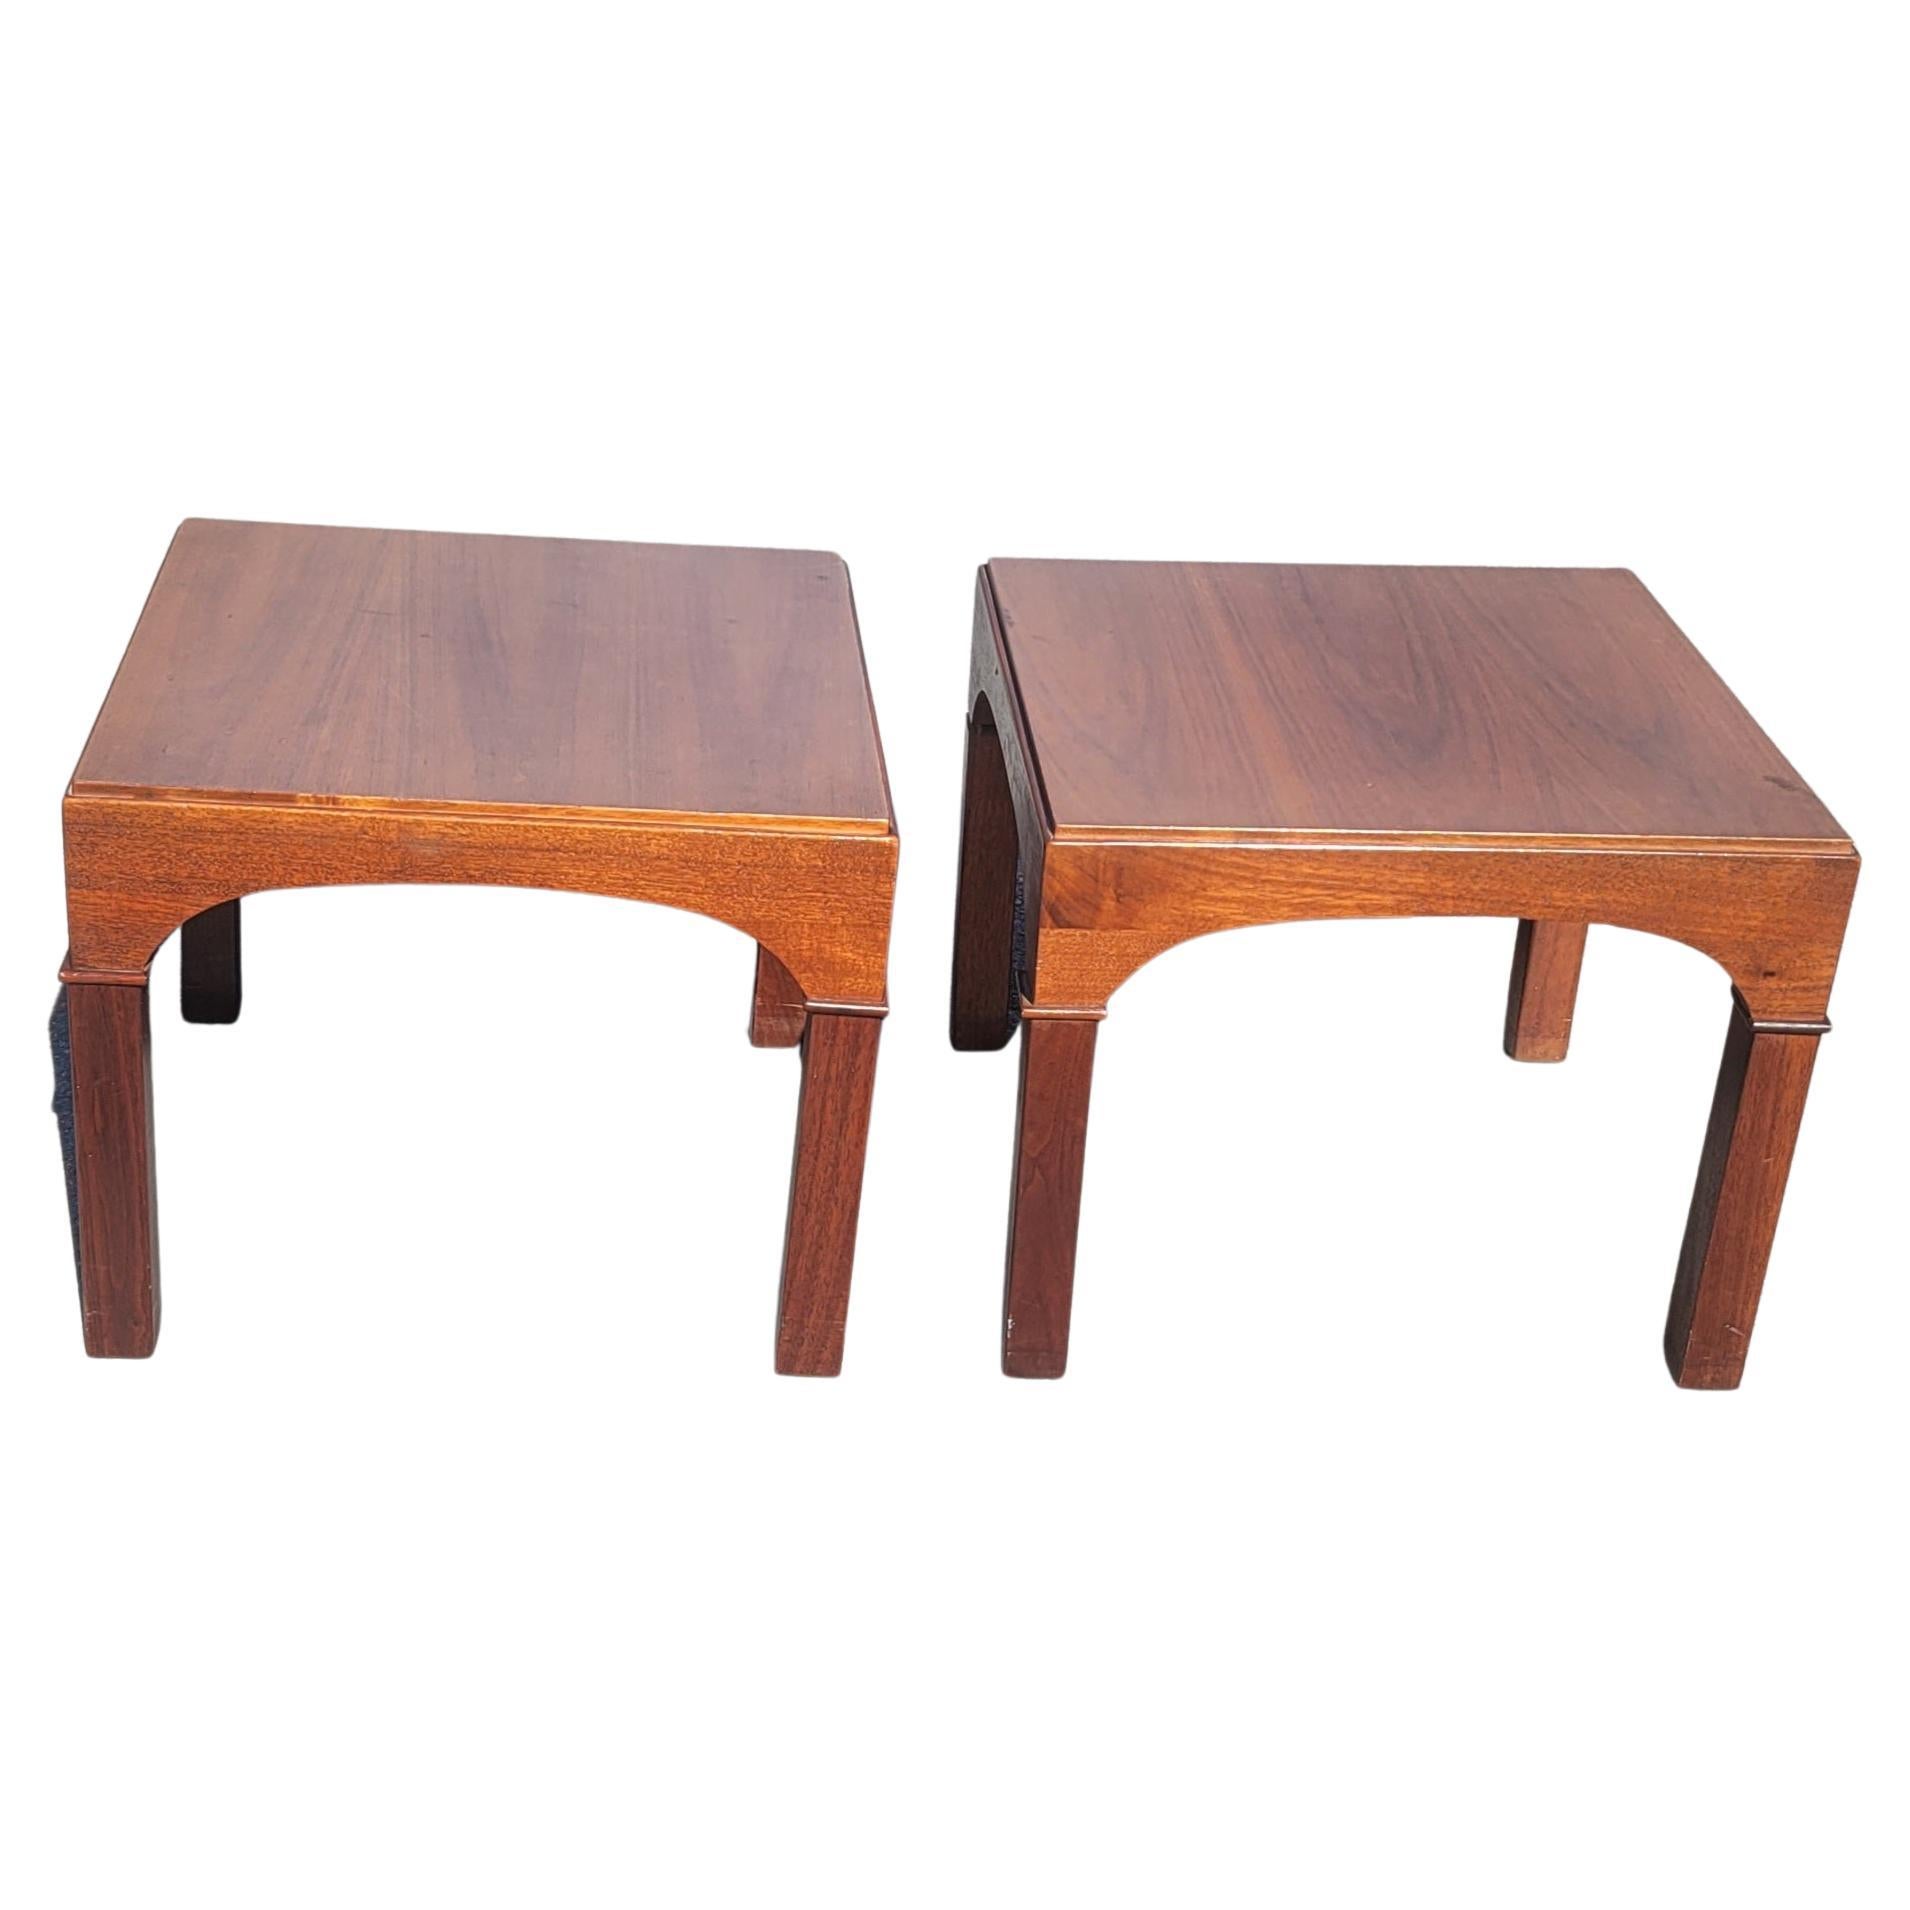 Mid-Century Modern Parsons Walnut Side Tables, a Pair In Good Condition For Sale In Germantown, MD